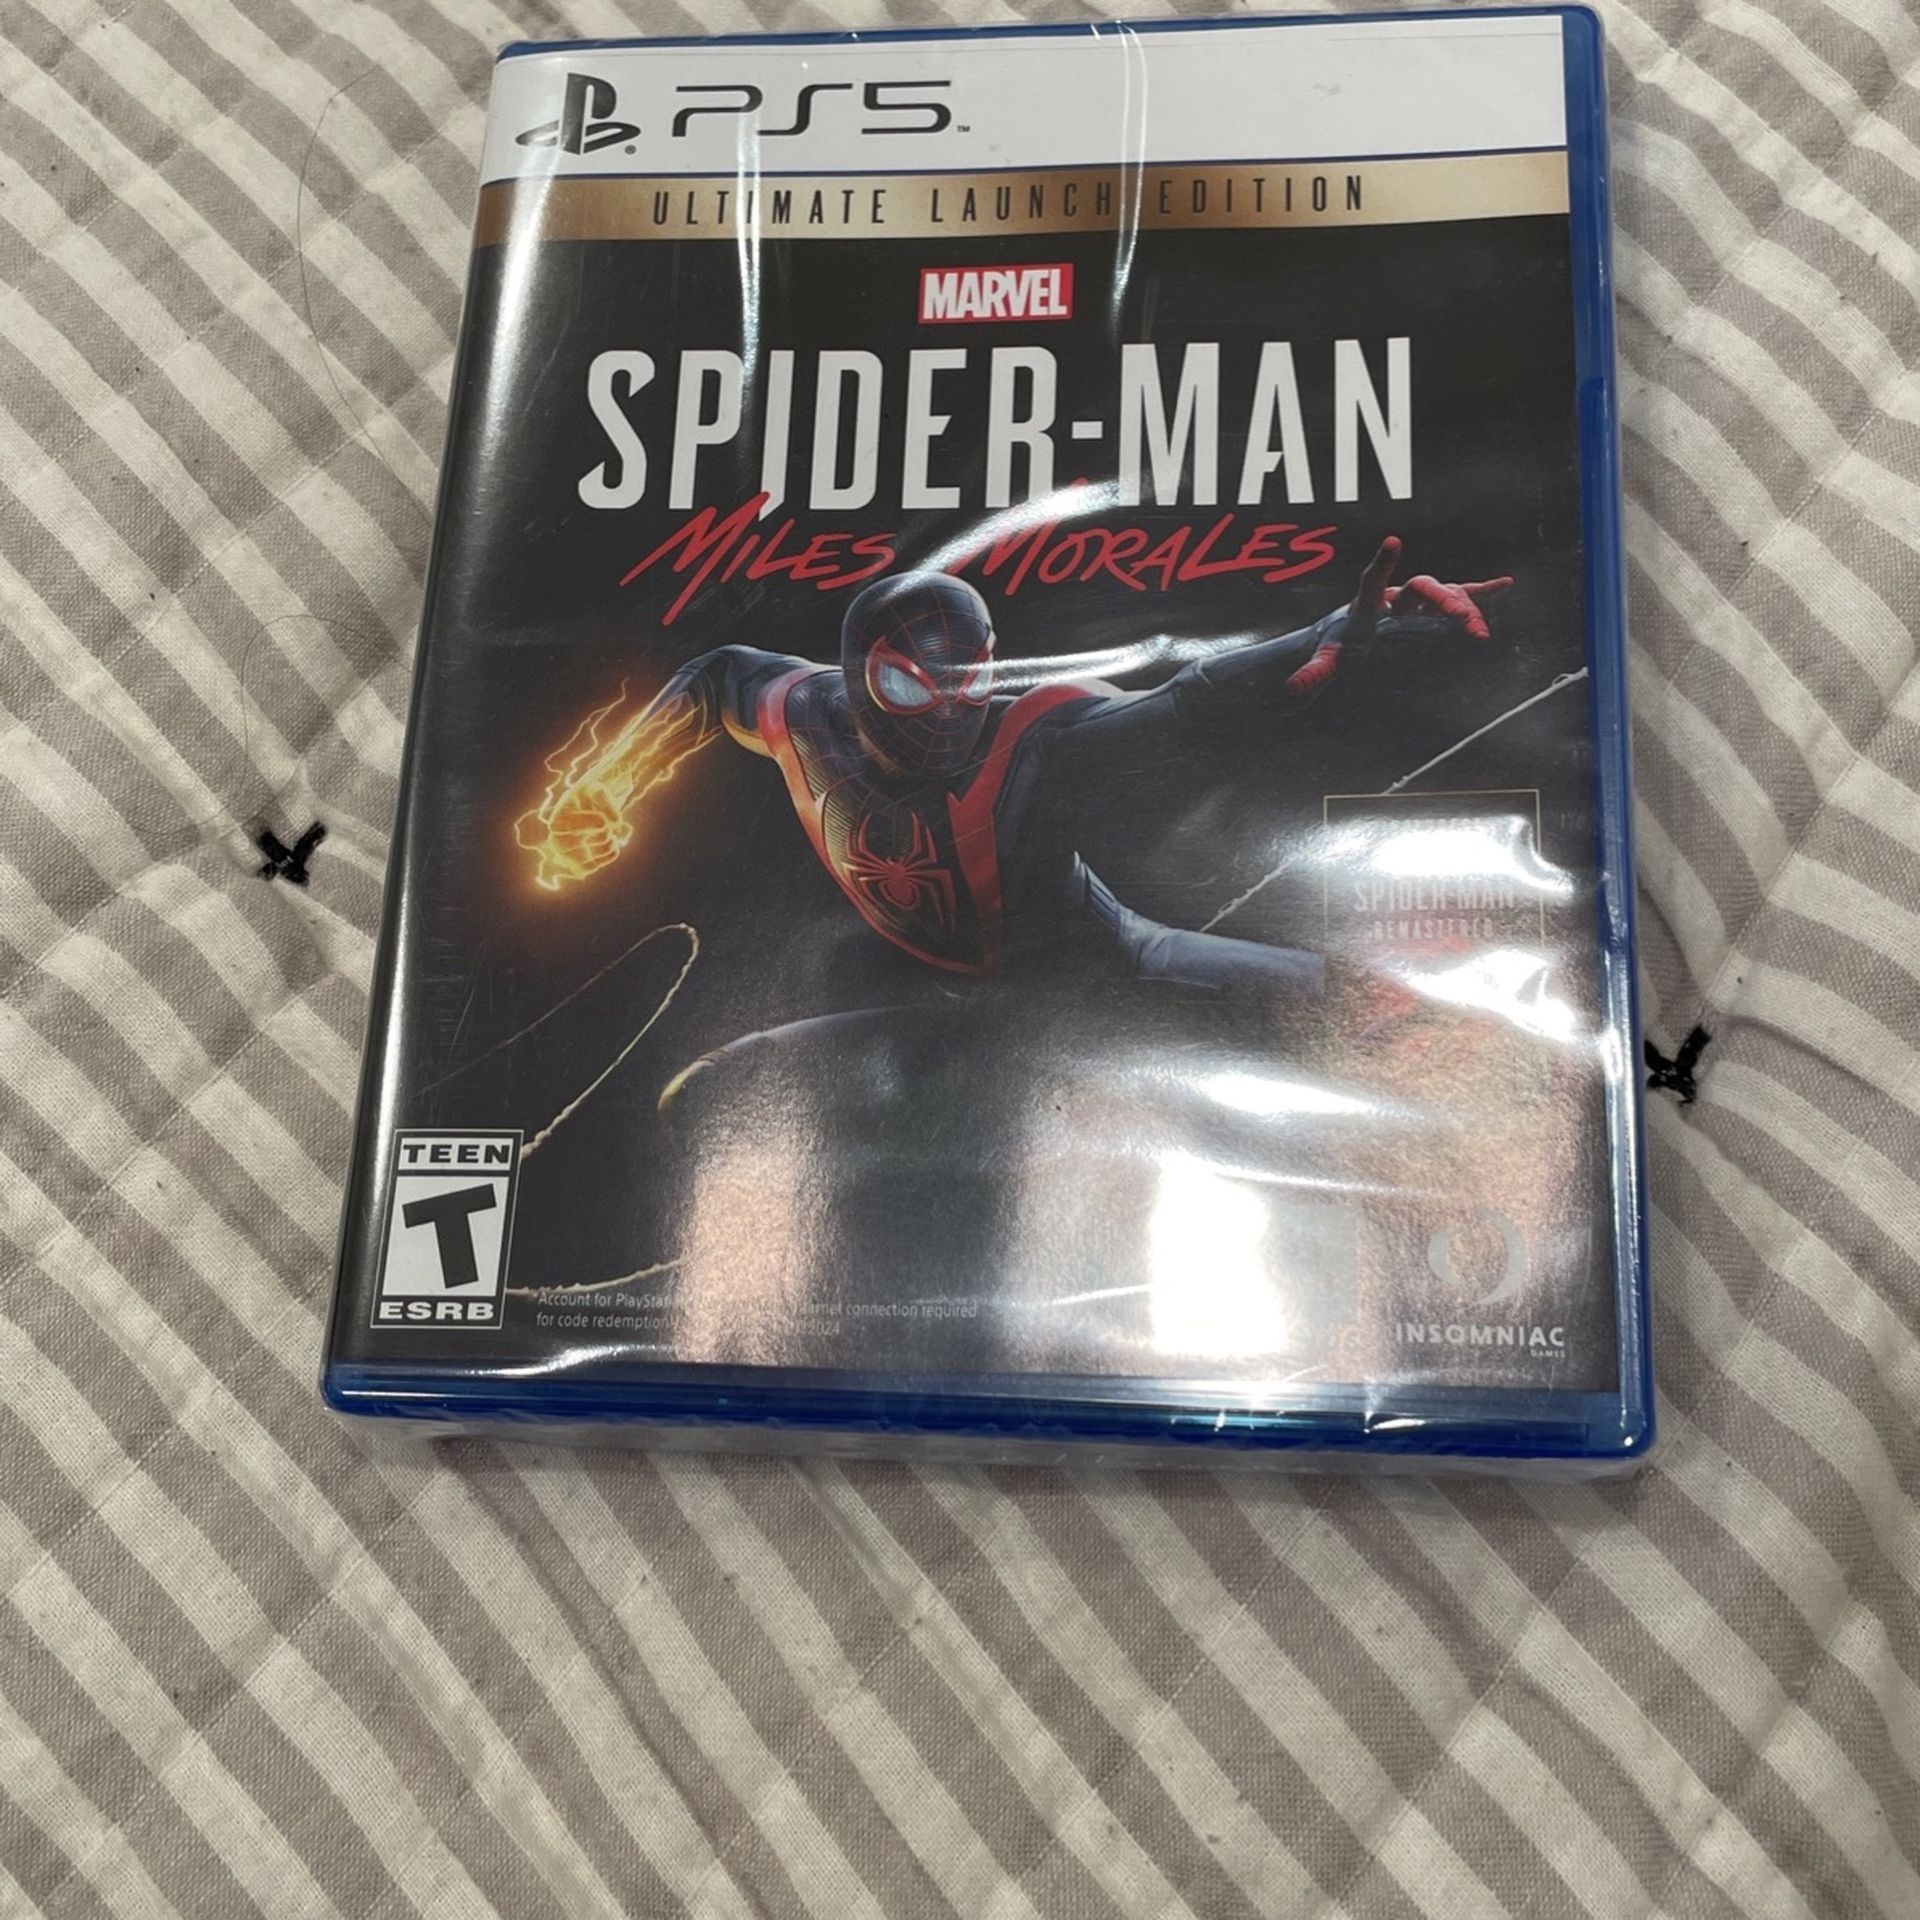 SPIDER-MAN ULTIMATE LAUNCH EDITION